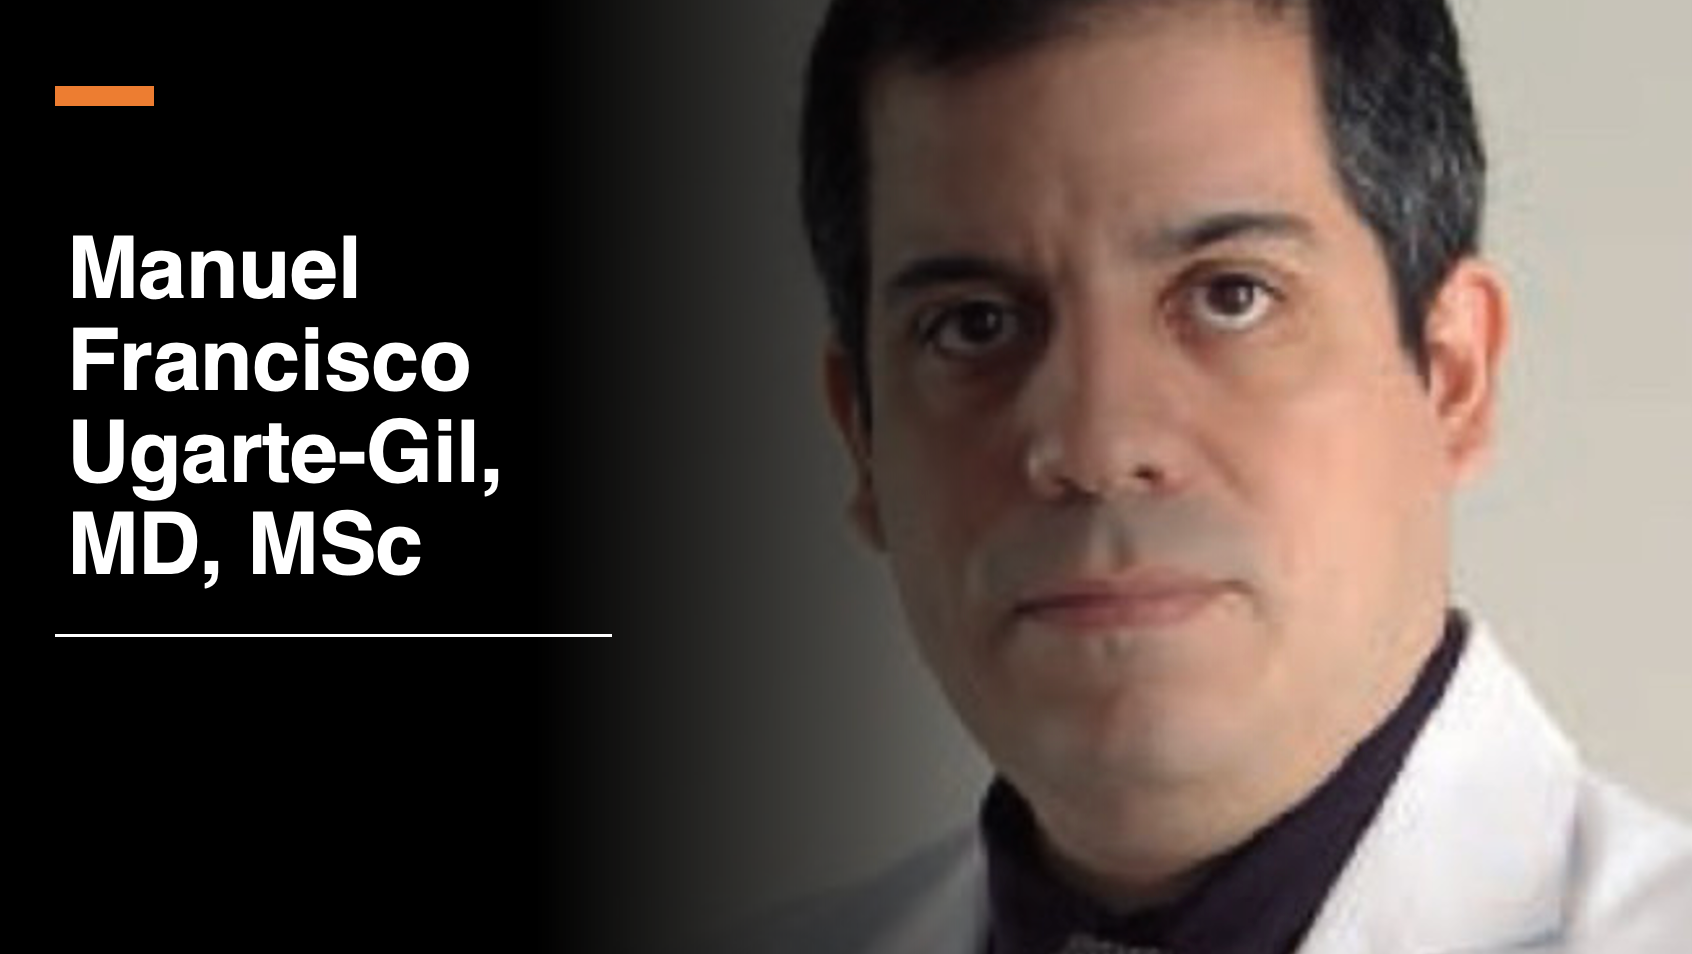 Manuel Francisco Ugarte-Gil, MD, MSc: Severe Flares and Poorer Quality of Life in Patients With SLE